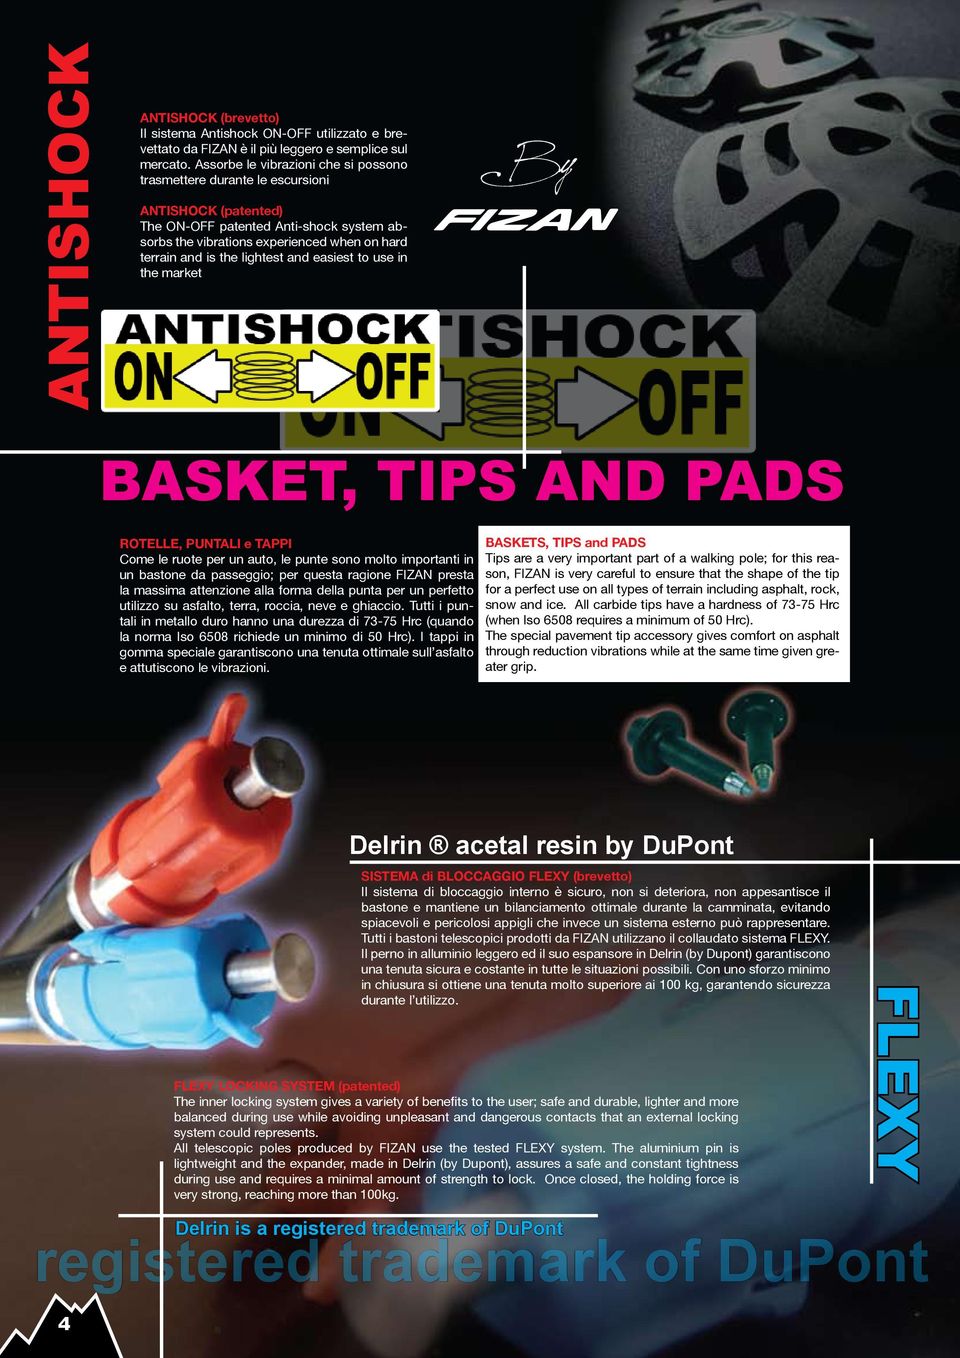 ANTISHOCK (patented) The ON-OFF patented Anti-shock system absorbs the vibrations experienced when on hard terrain and is the lightest and easiest to use in the market By BASKET, TIPS AND PADS